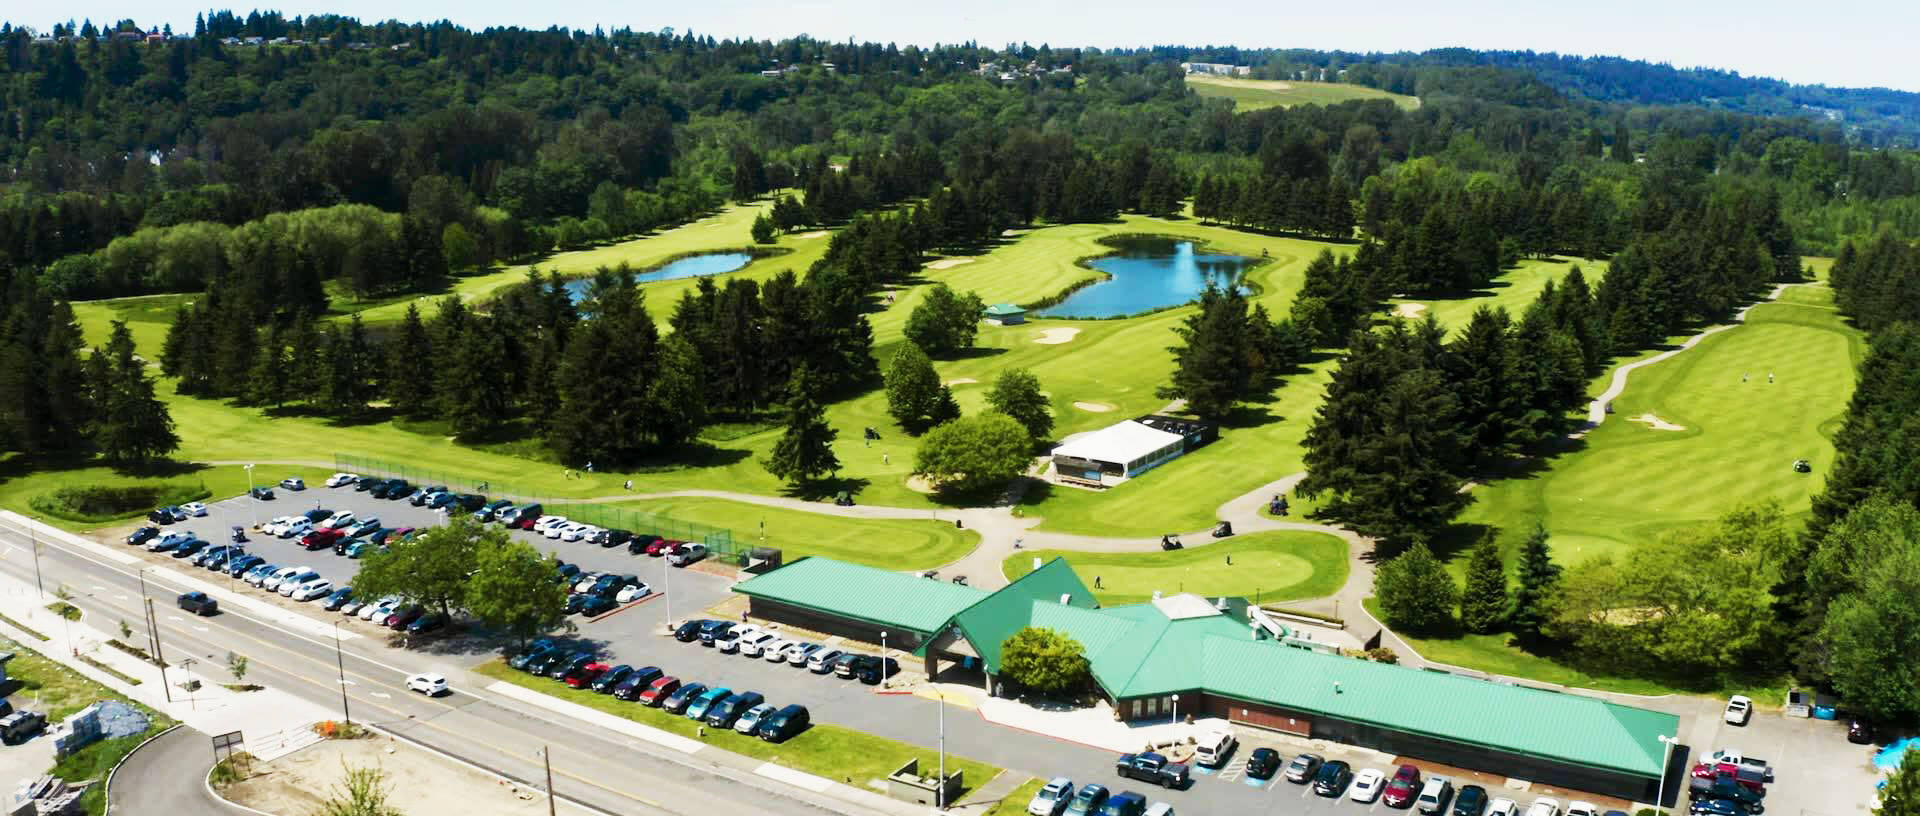 The Riverbend Golf Complex in Kent along West Meeker Street. COURTESY PHOTO, City of Kent